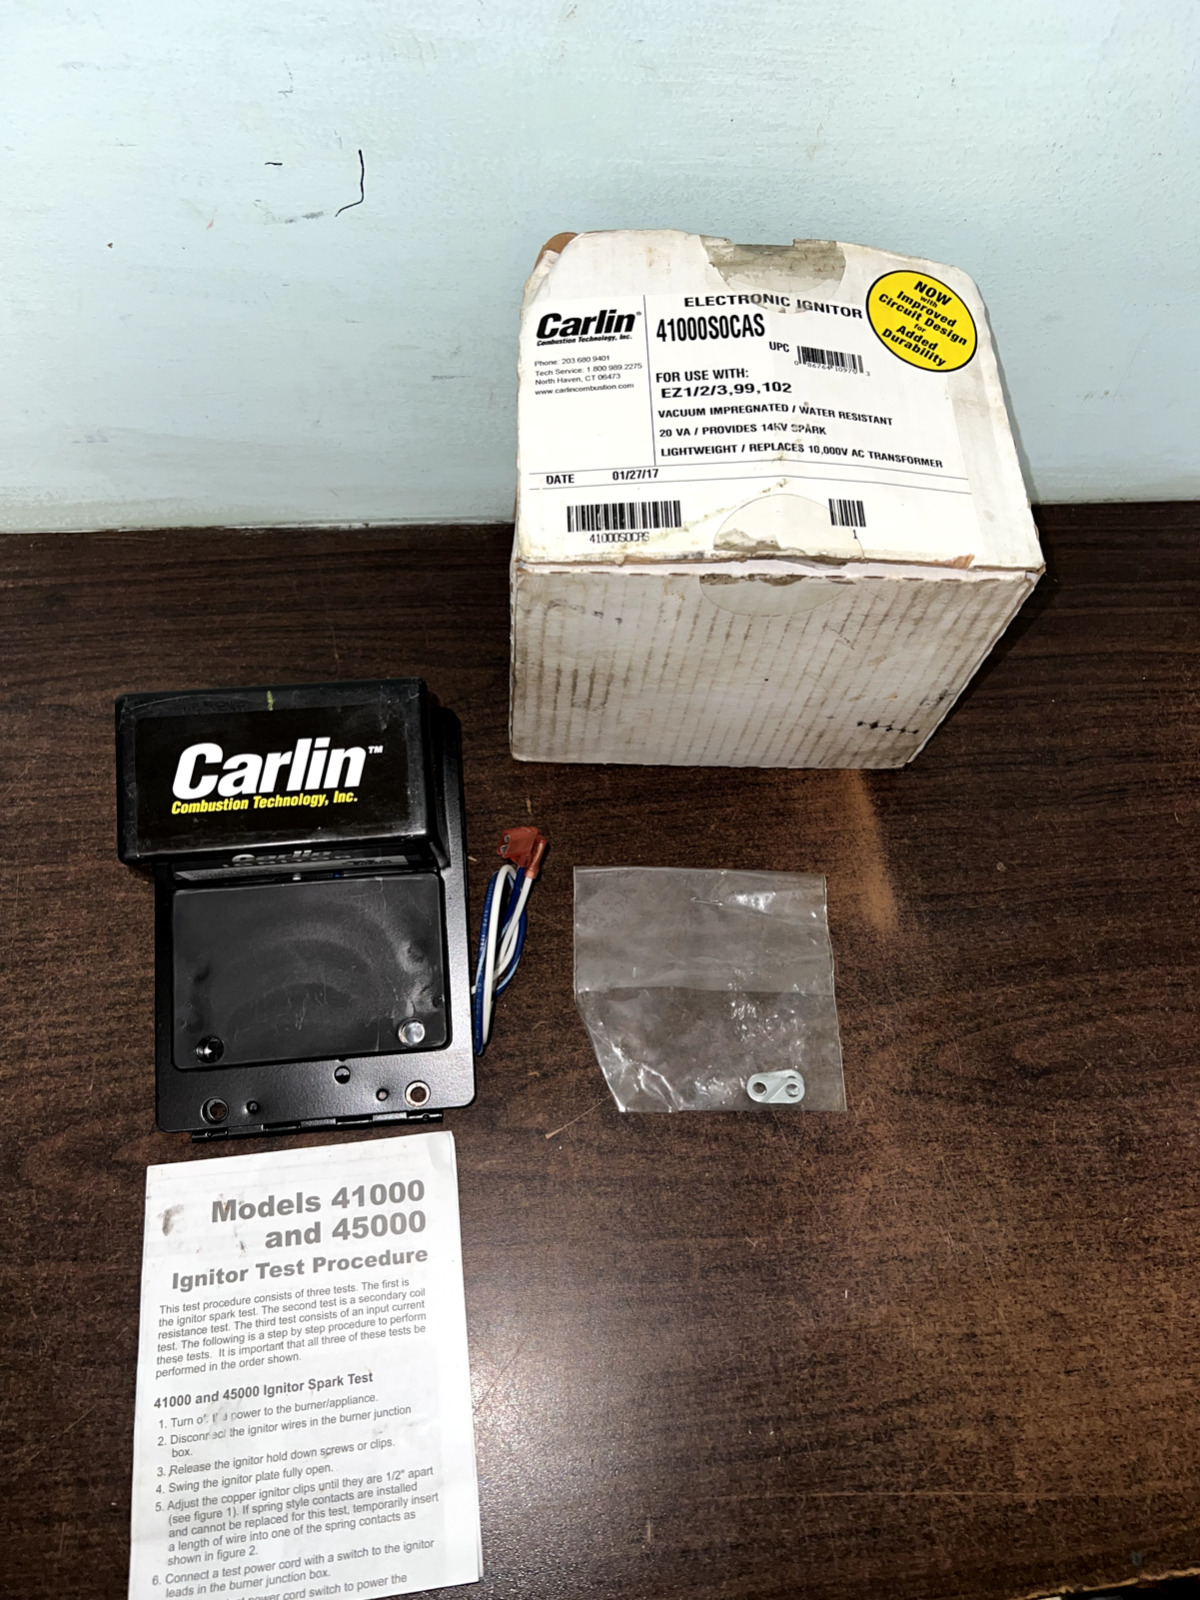 NEW CARLIN MODEL 41000S0CAS ELECTRONIC IGNITOR